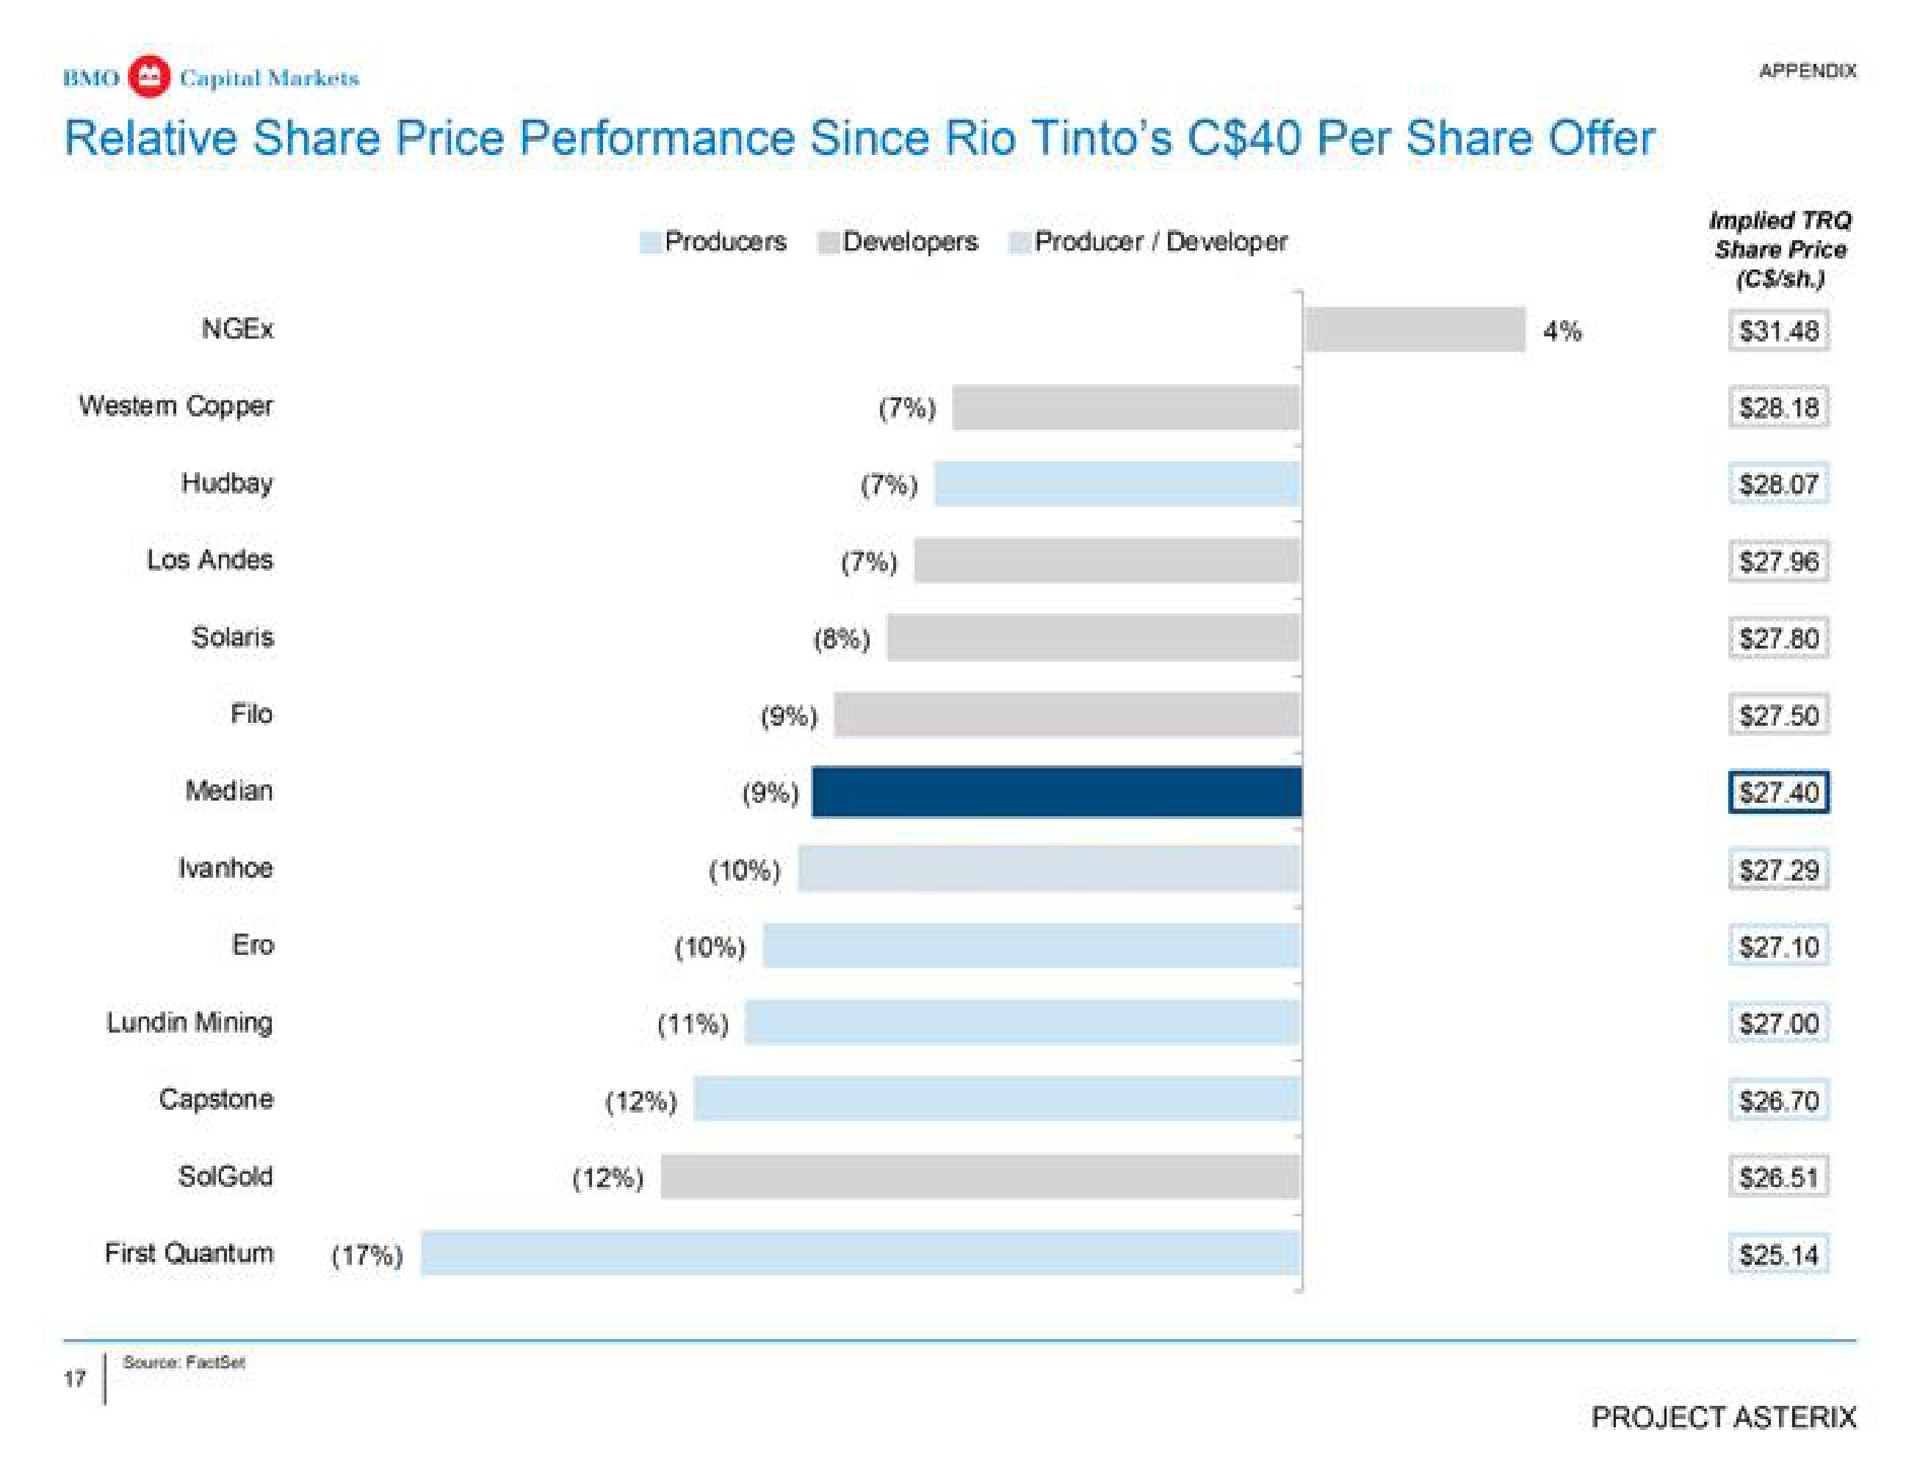 relative share price performance since rio per share offer implied share price | BMO Capital Markets